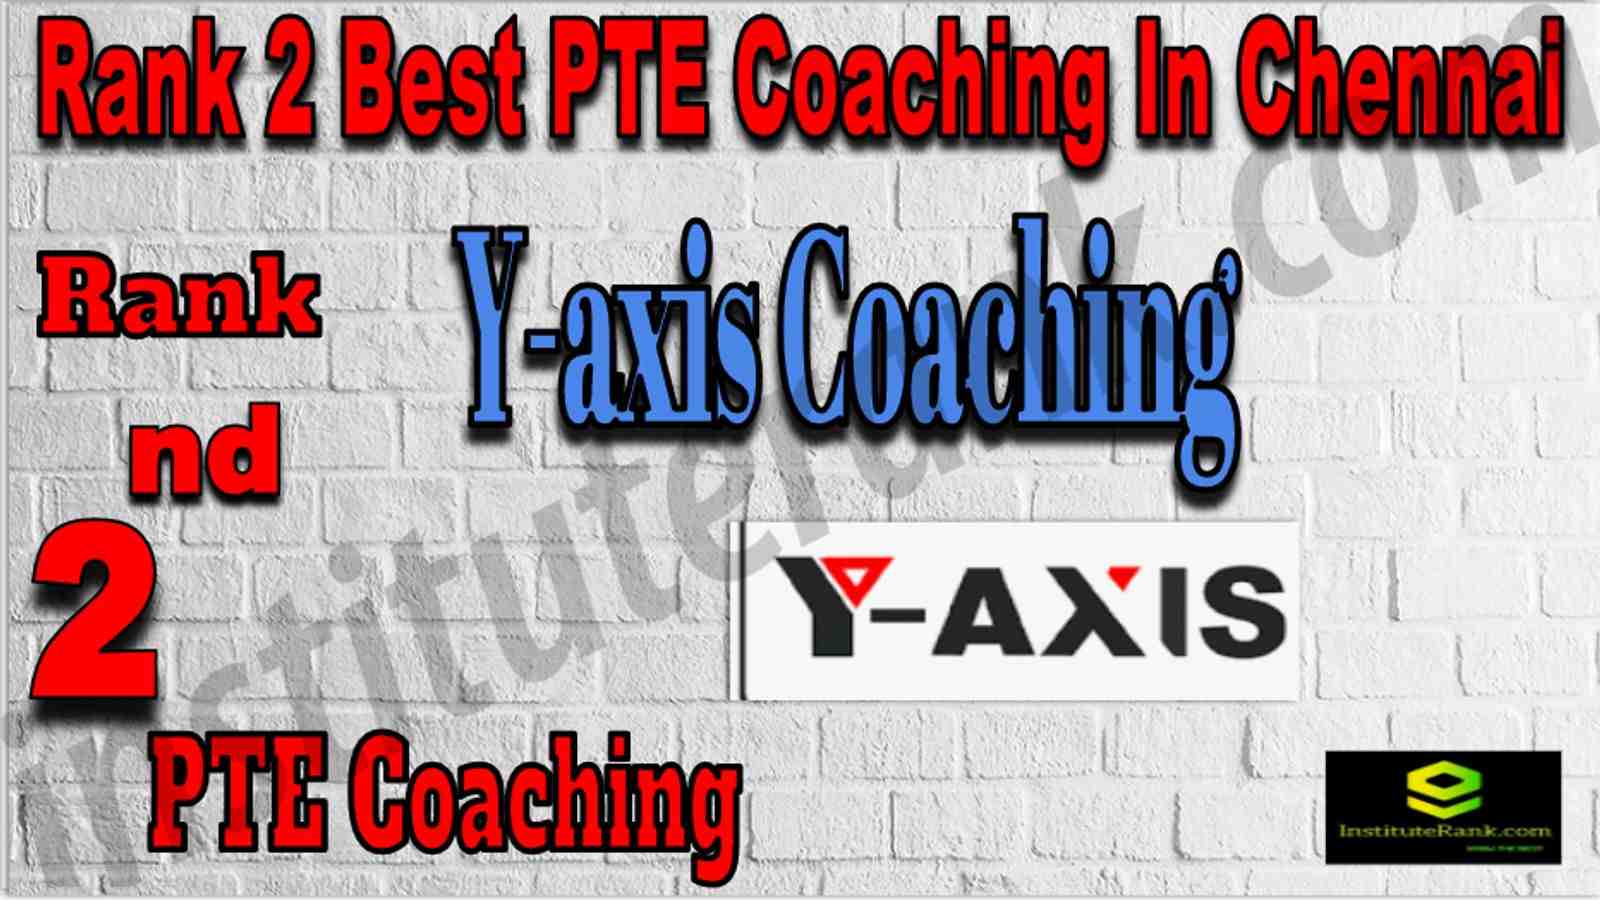 2nd Best PTE Coaching In Chennai